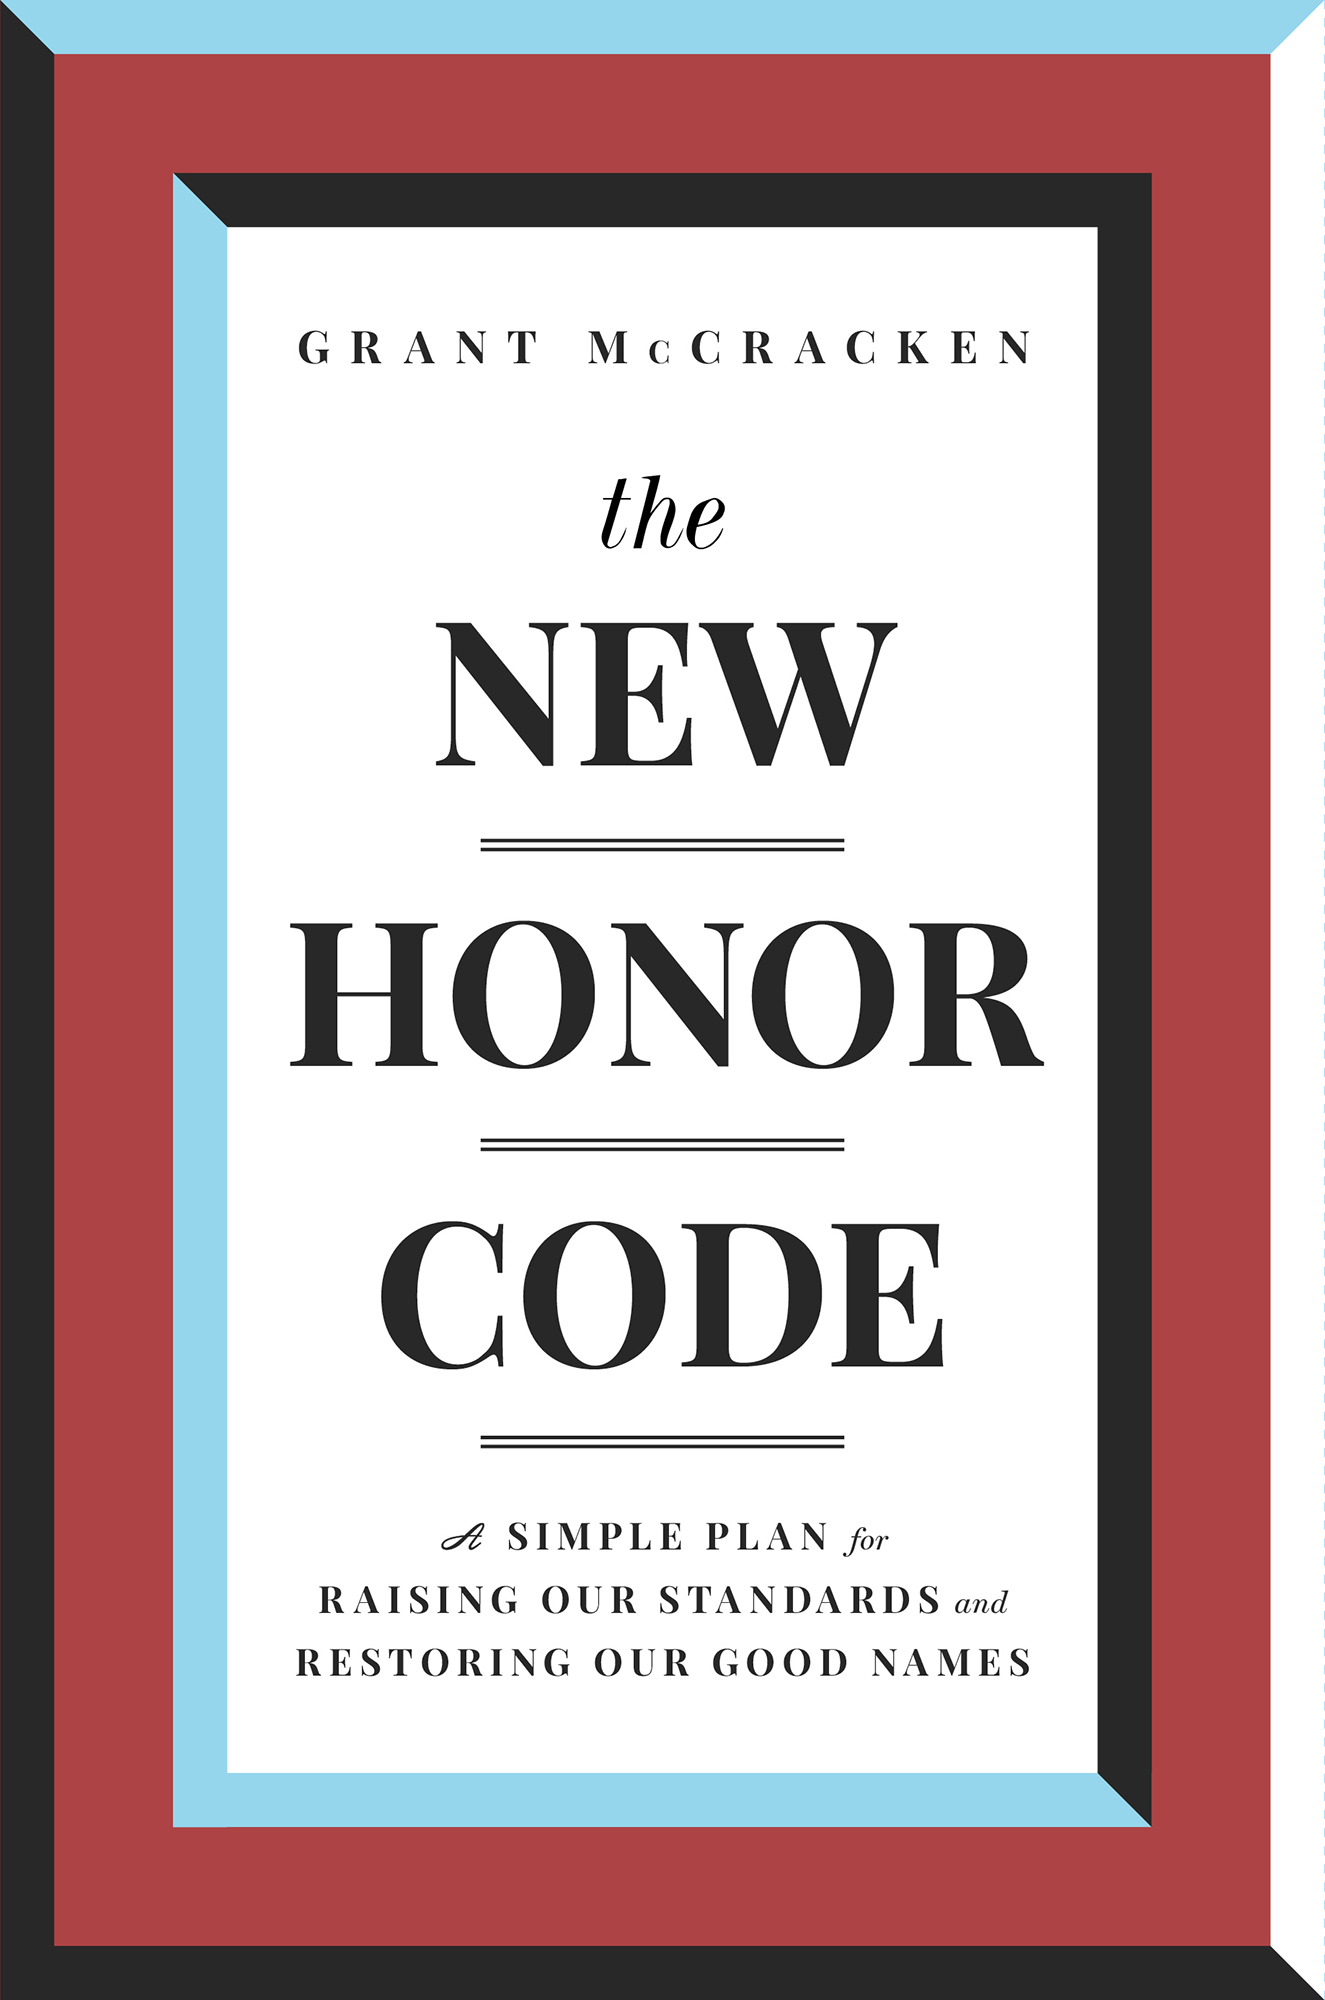 The New Honor Code A Simple Plan for Raising Our Standards and Restoring Our Good Names - image 1